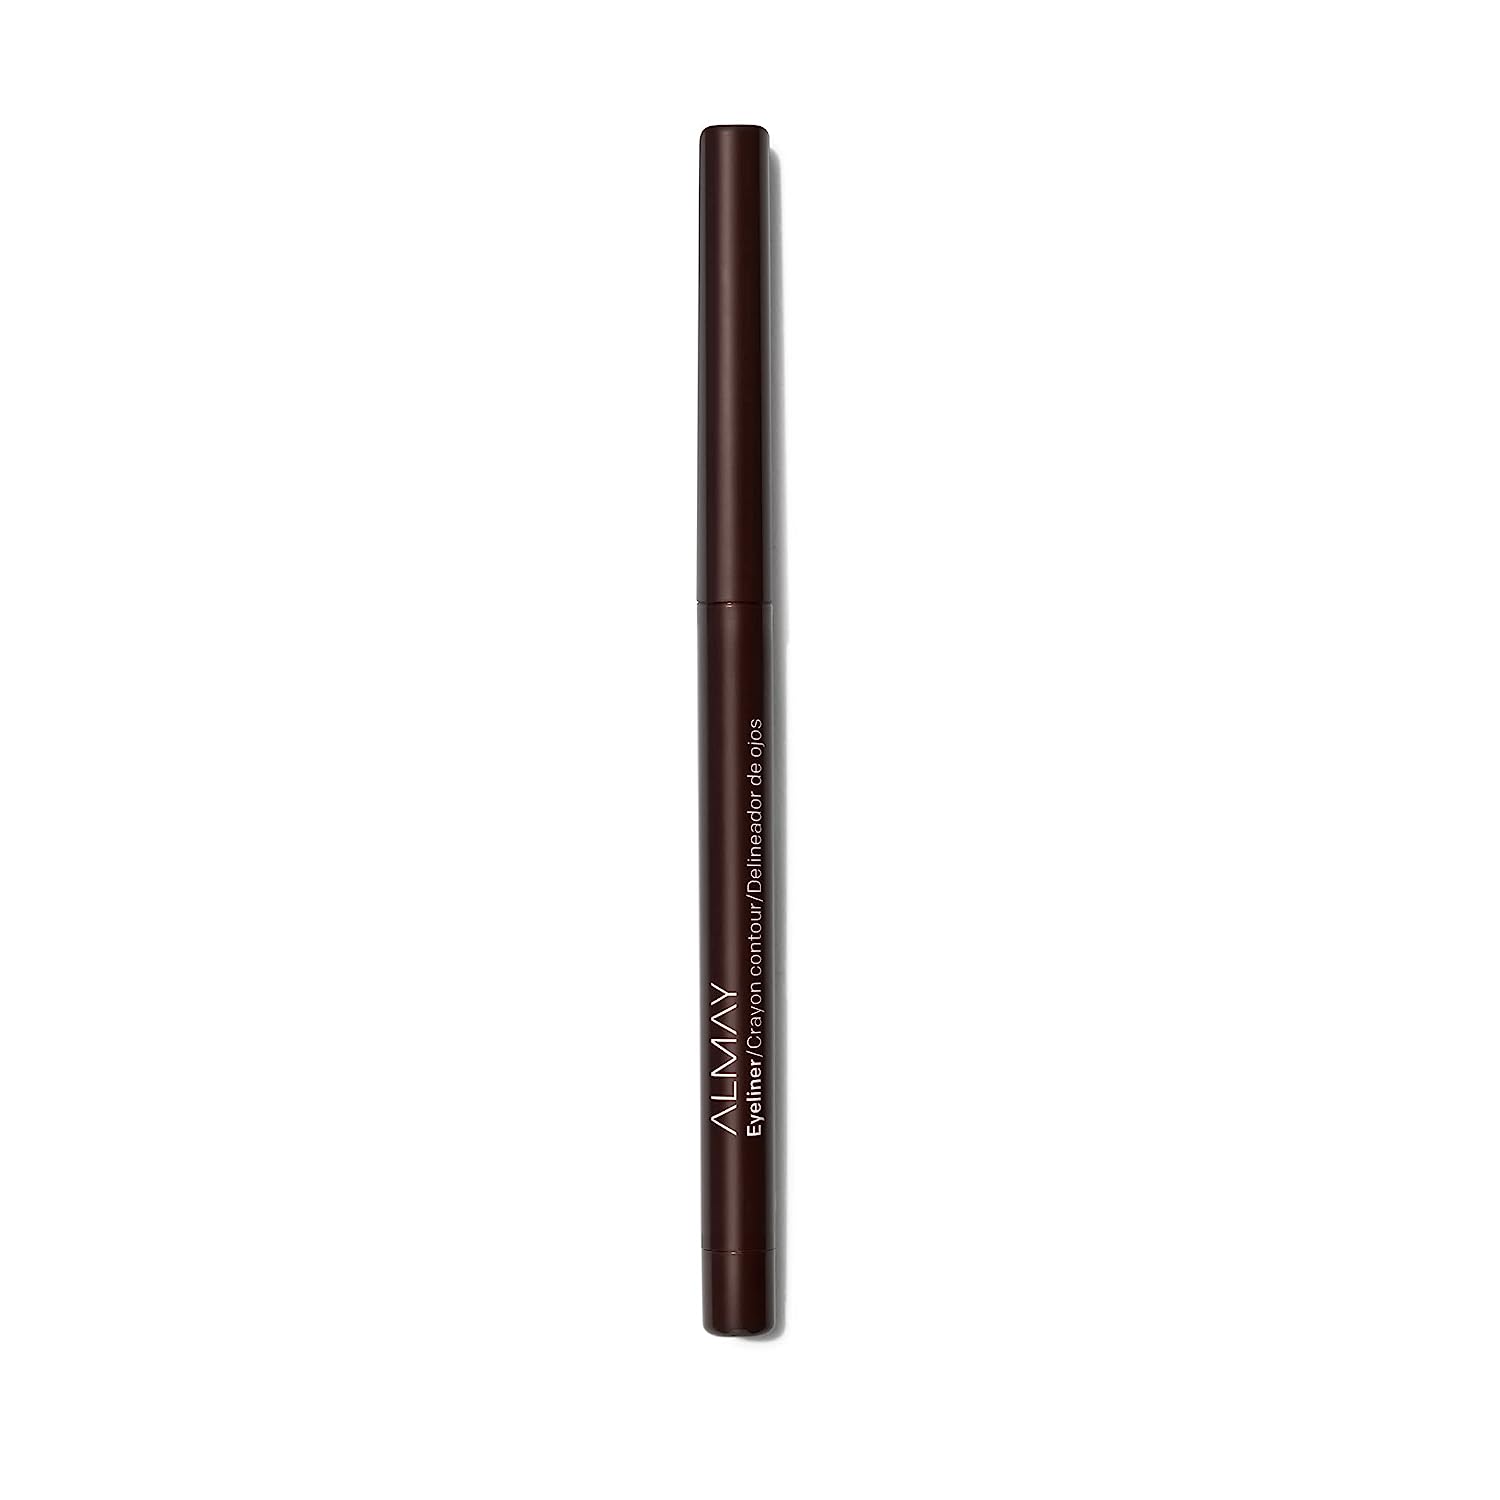 Almay Eyeliner Pencil, Hypoallergenic, Cruelty Free, Oil Free, unscented, Ophthalmologist Tested, Long Wearing and Water Resistant, with Built in Sharpener, 209 Black Raisin, 0.01